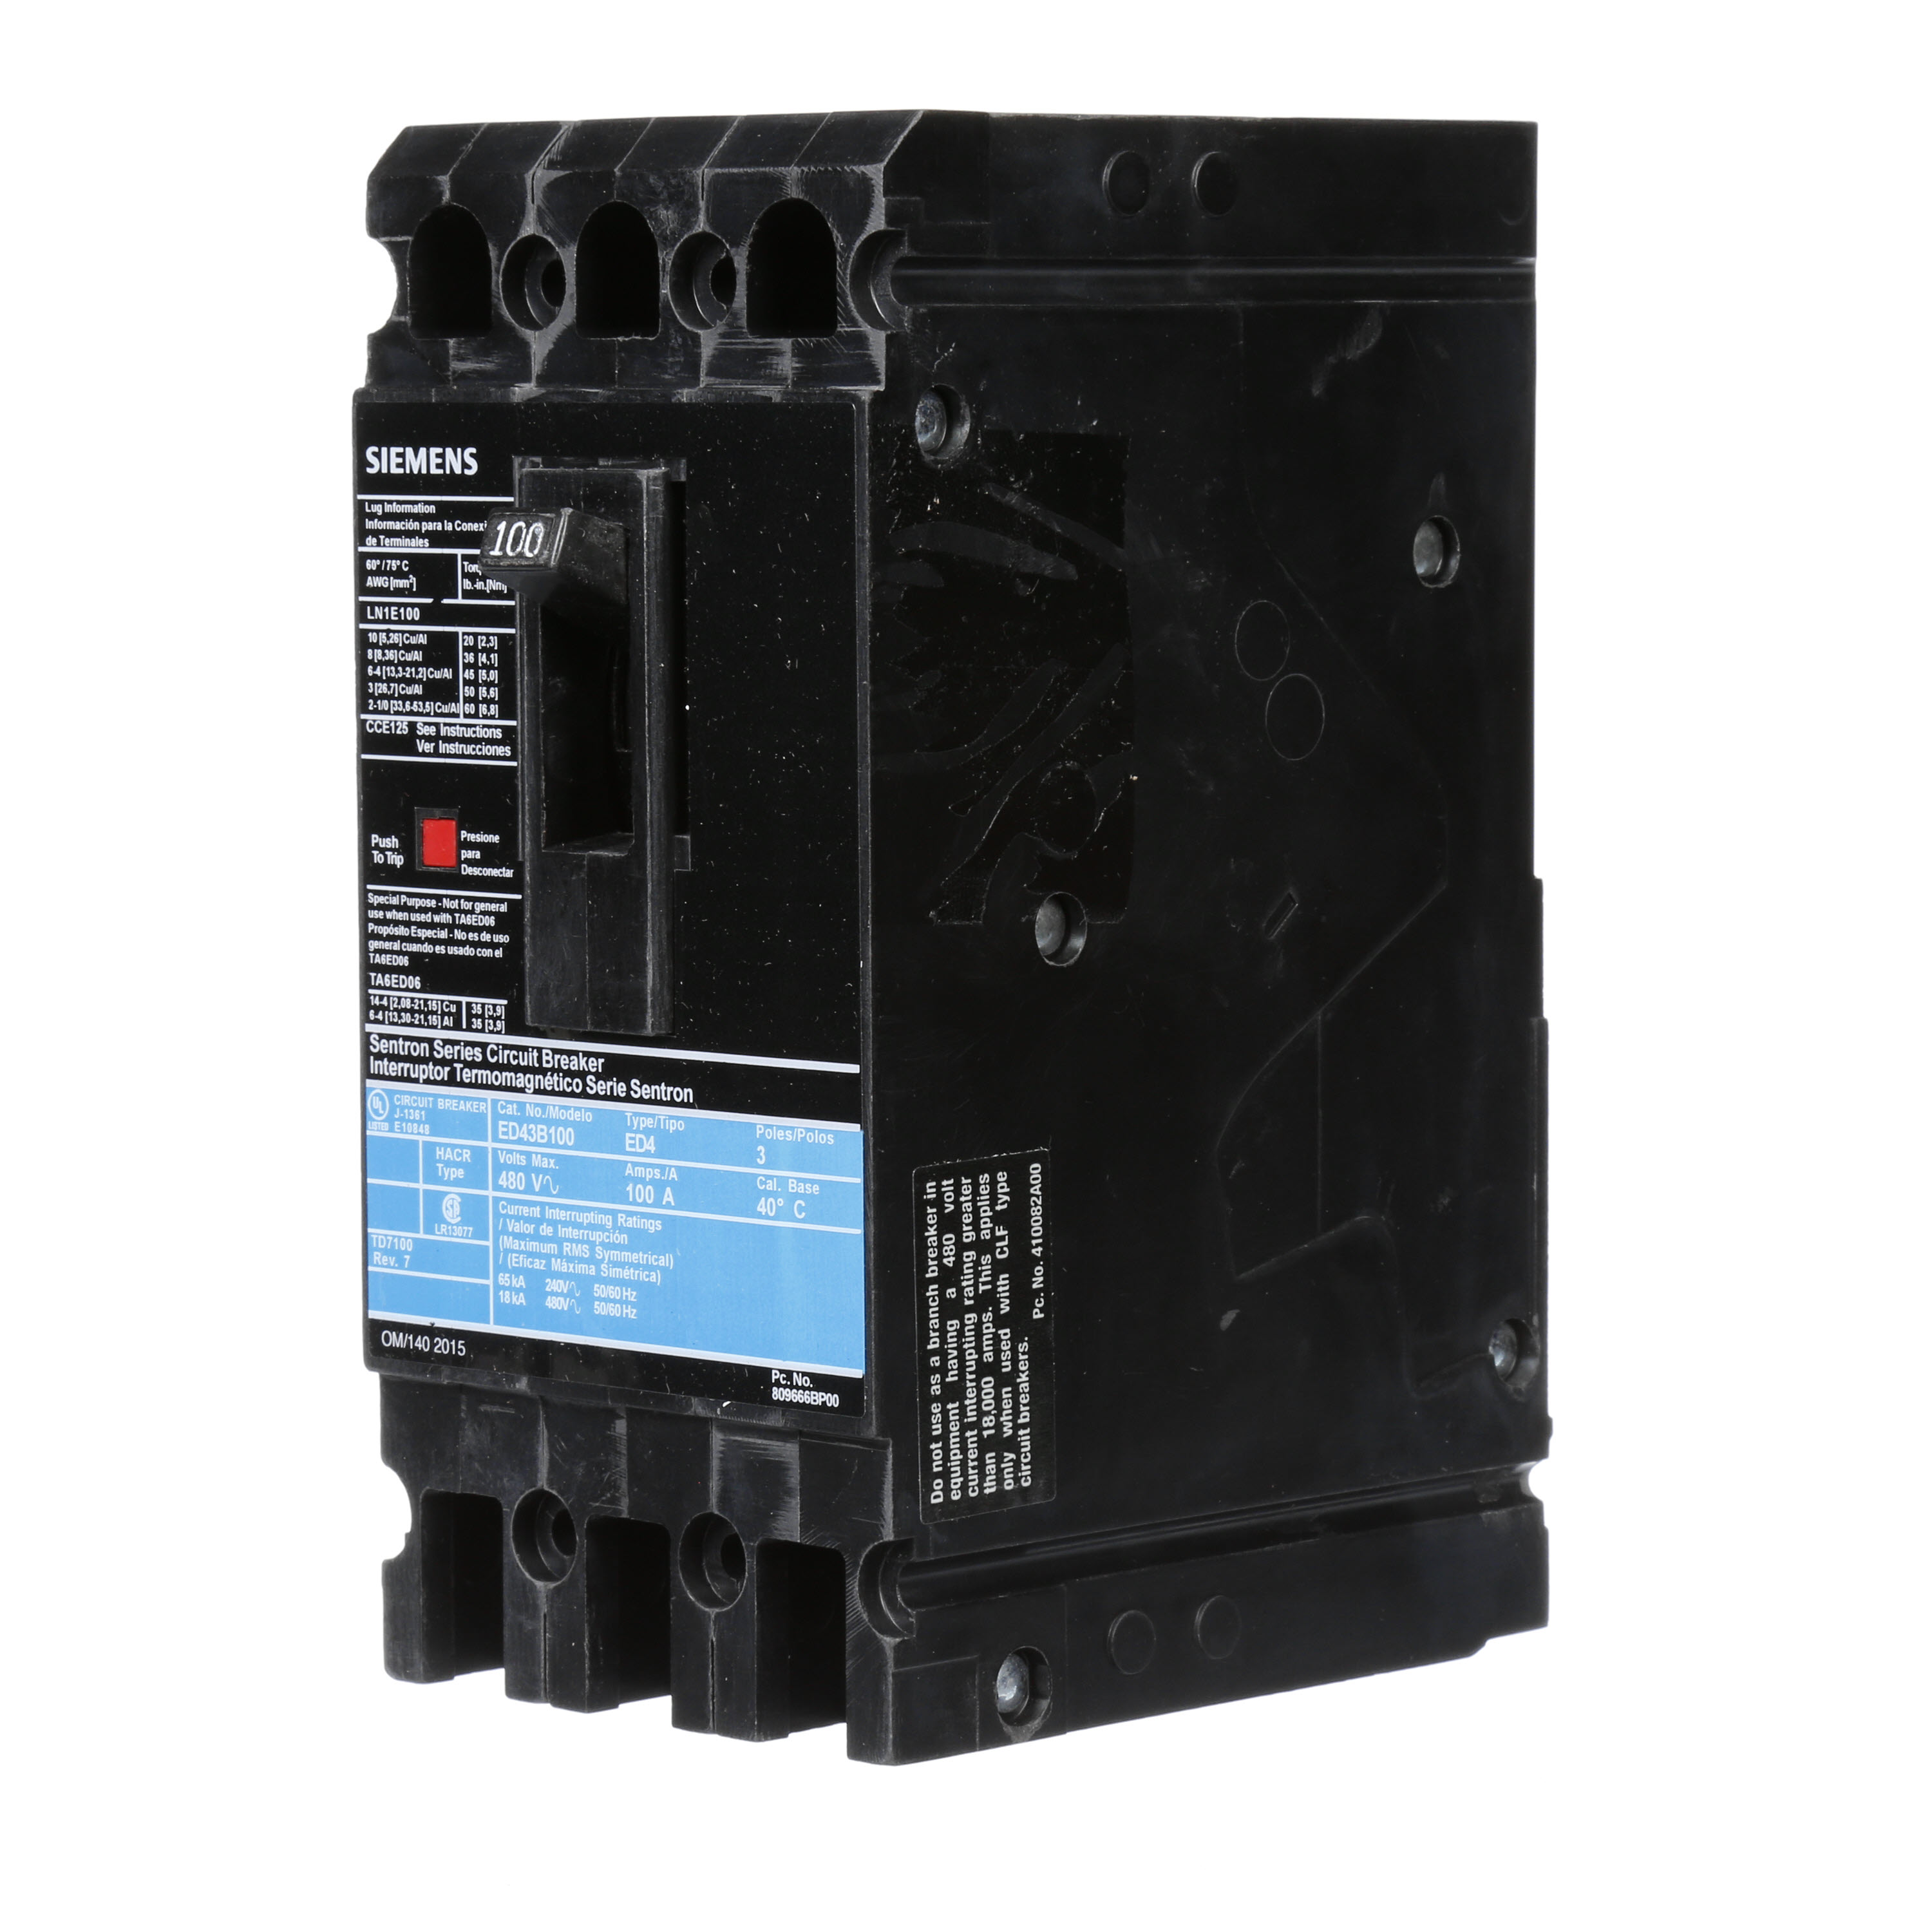 SIEMENS LOW VOLTAGE SENTRON MOLDED CASE CIRCUIT BREAKER WITH THERMAL - MAGNETICTRIP UNIT. STANDARD 40 DEG C BREAKER ED FRAME WITH STANDARD BREAKING CAPACITY. 100A 3-POLE (18KAIC AT 480V). NON-INTERCHANGEABLE TRIP UNIT. SPECIAL FEATURES LINE AND LOAD SIDE LUGS (LN1E100) WIRE RANGE 10 - 1/0AWG (CU/AL). DIMENSIONS (W x H x D) IN 3.00 x 6.4 x 3.92.